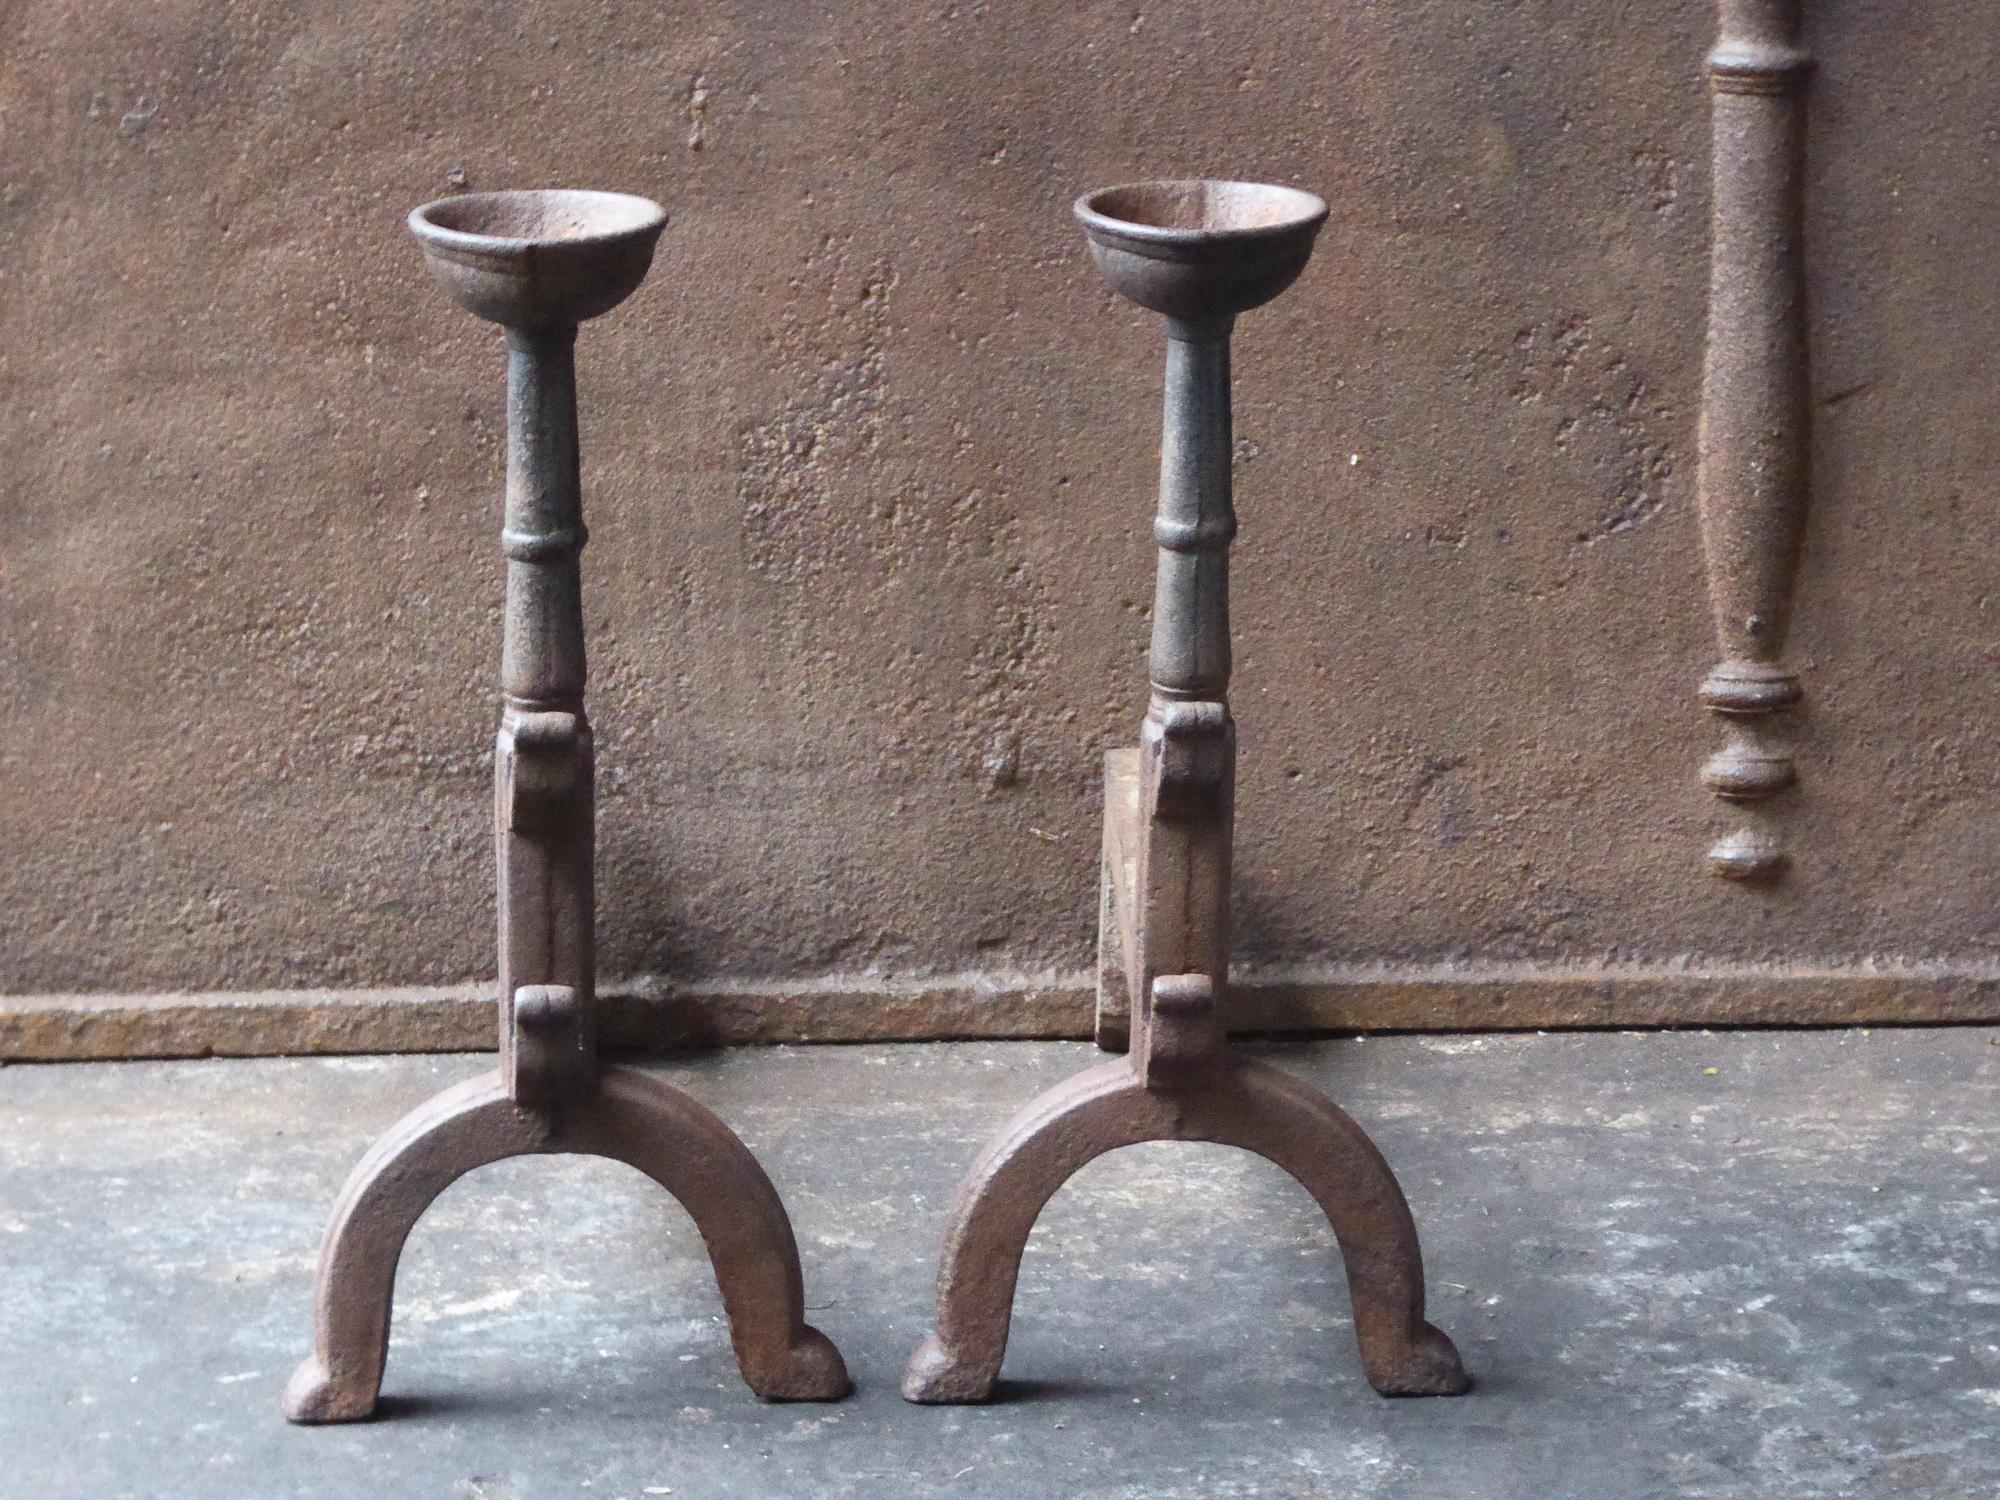 French Gothic style fire dogs made of cast iron. With spit hooks to grill food and a cup to keep drinks or soup warm. This type of andirons are also called cupdogs.

We have a unique and specialized collection of antique and used fireplace